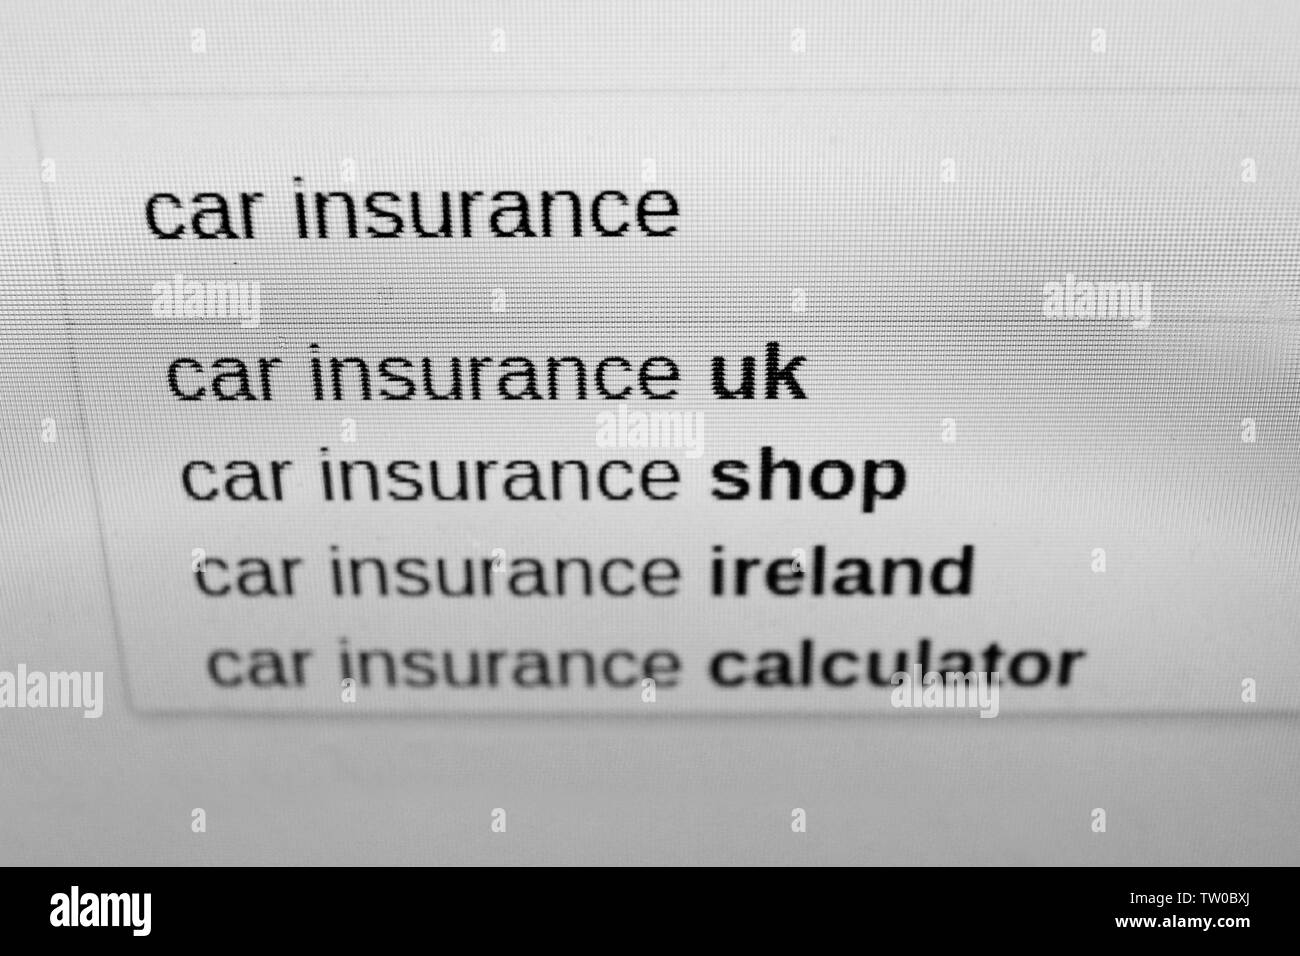 Web searching of car insurance information Stock Photo